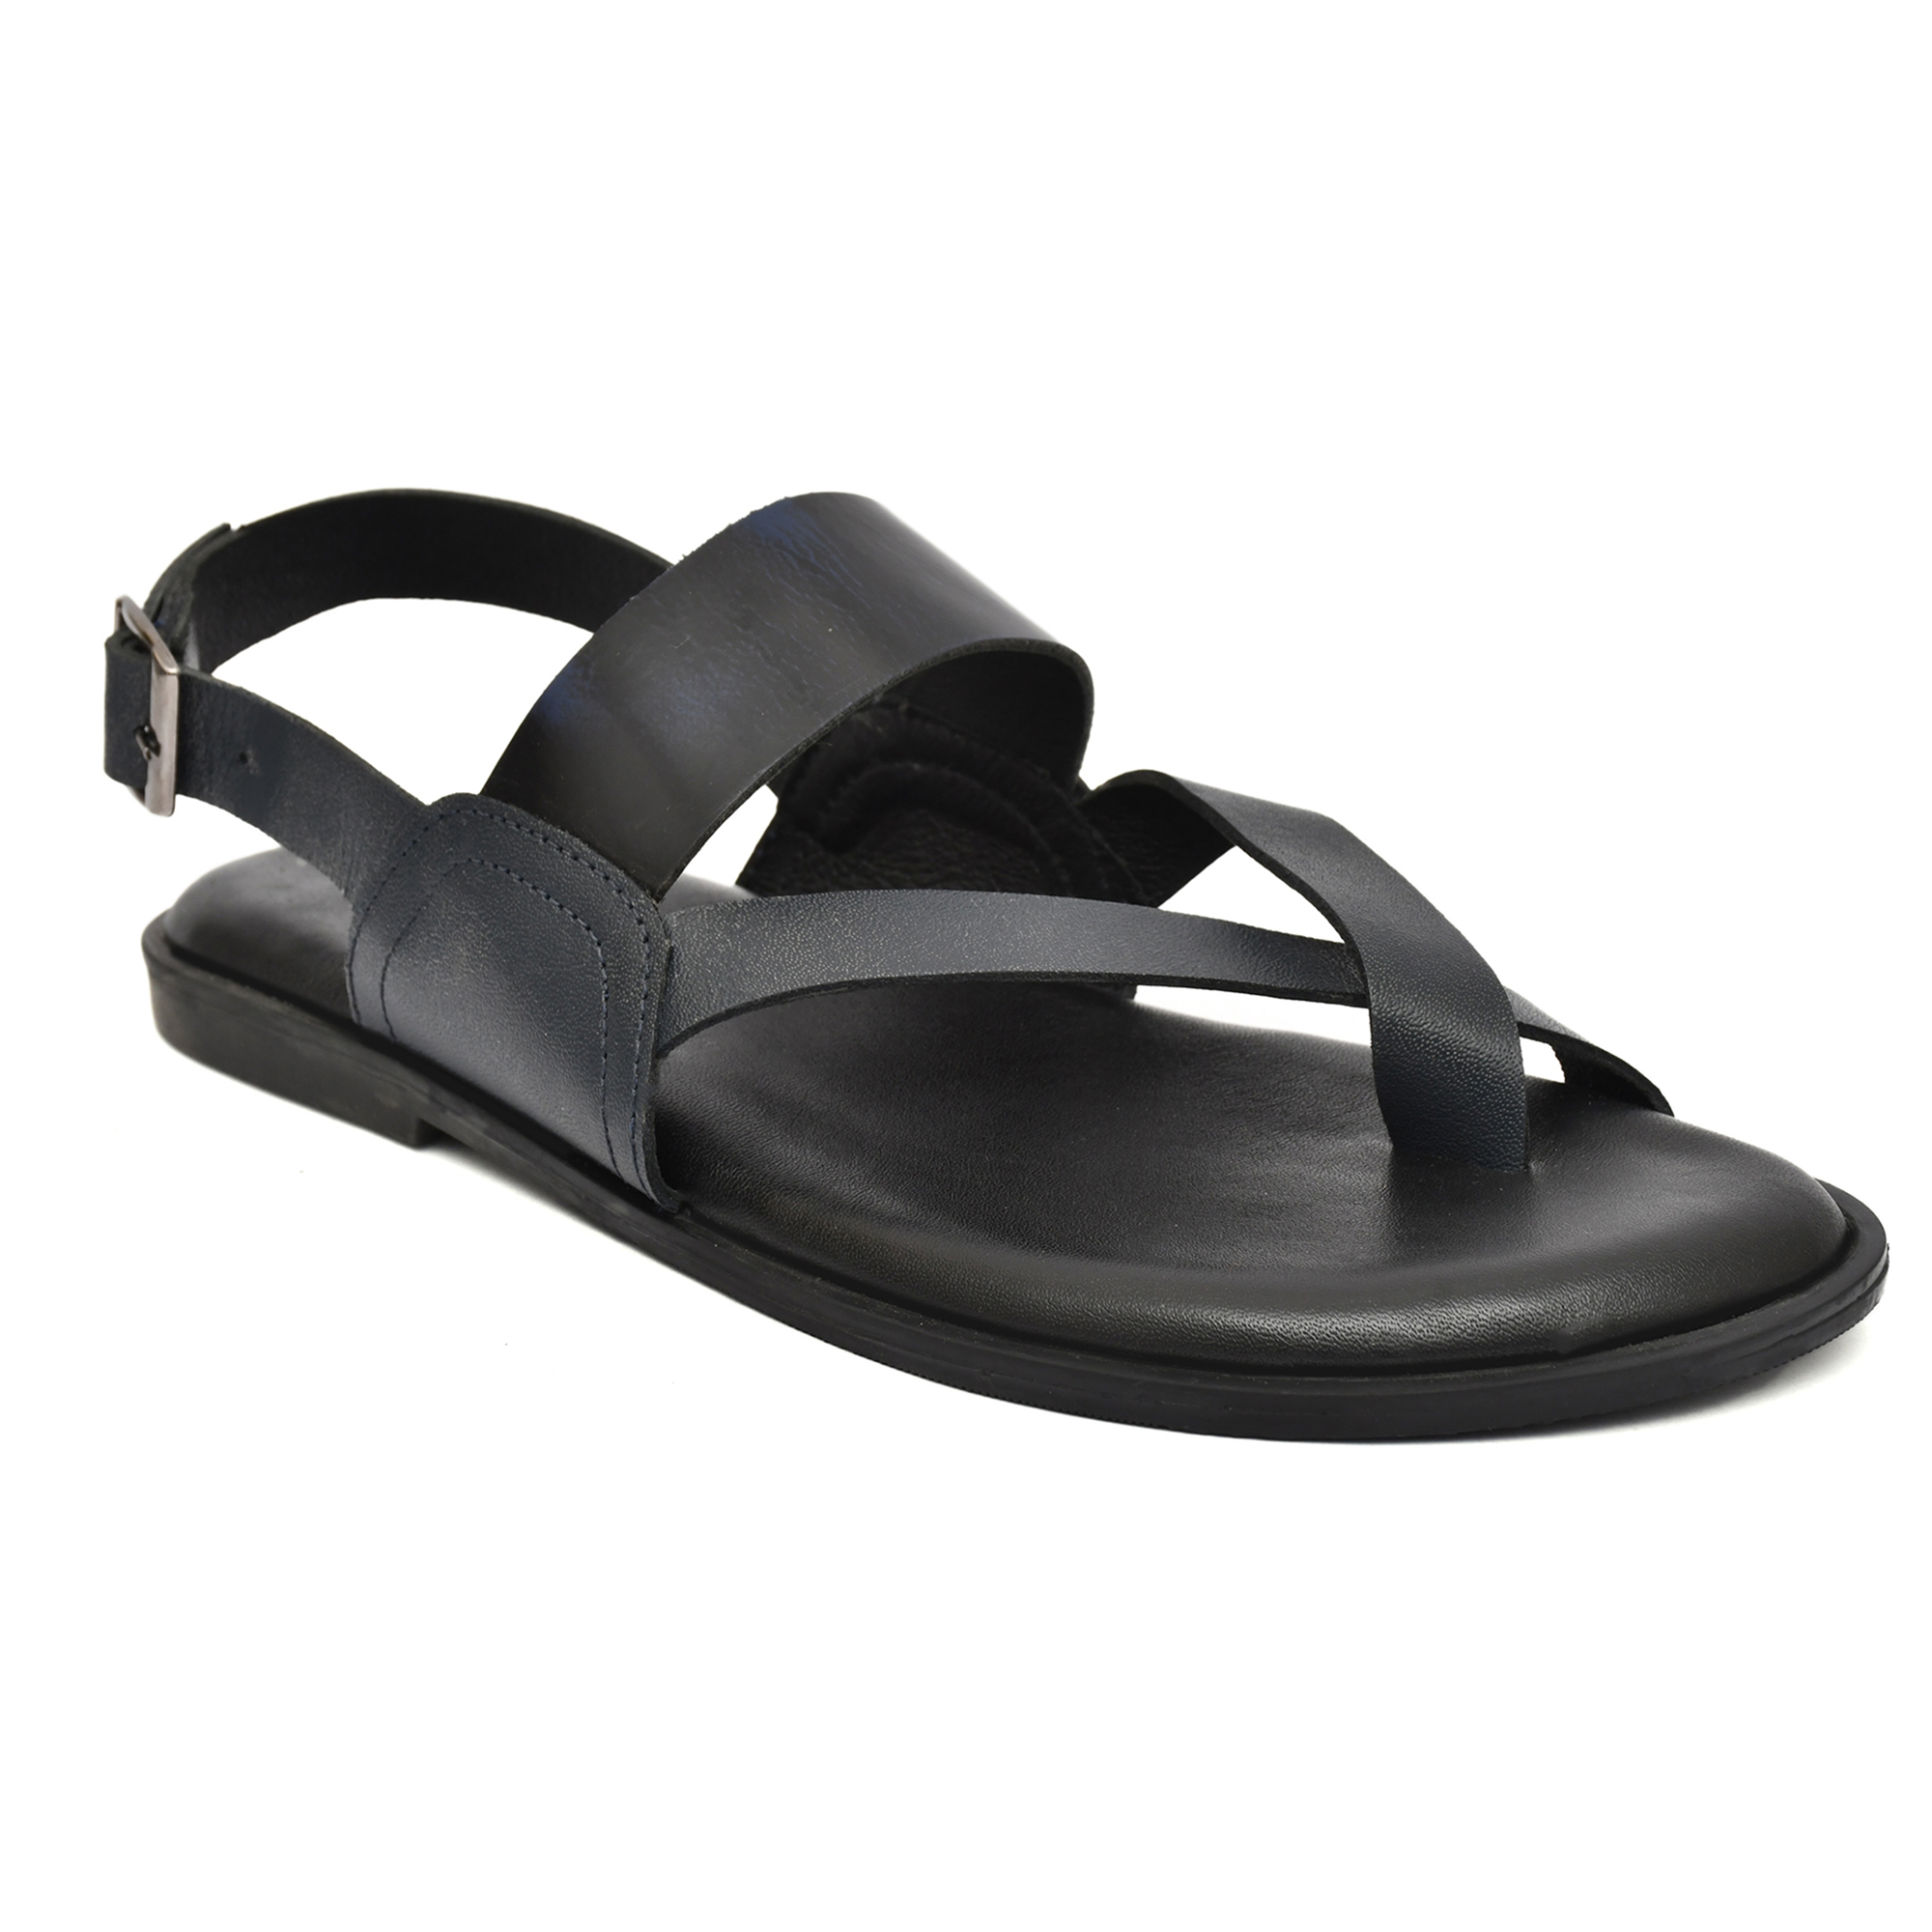 Blue Leather Sandals for Mens with Memory foam footpad by asm.